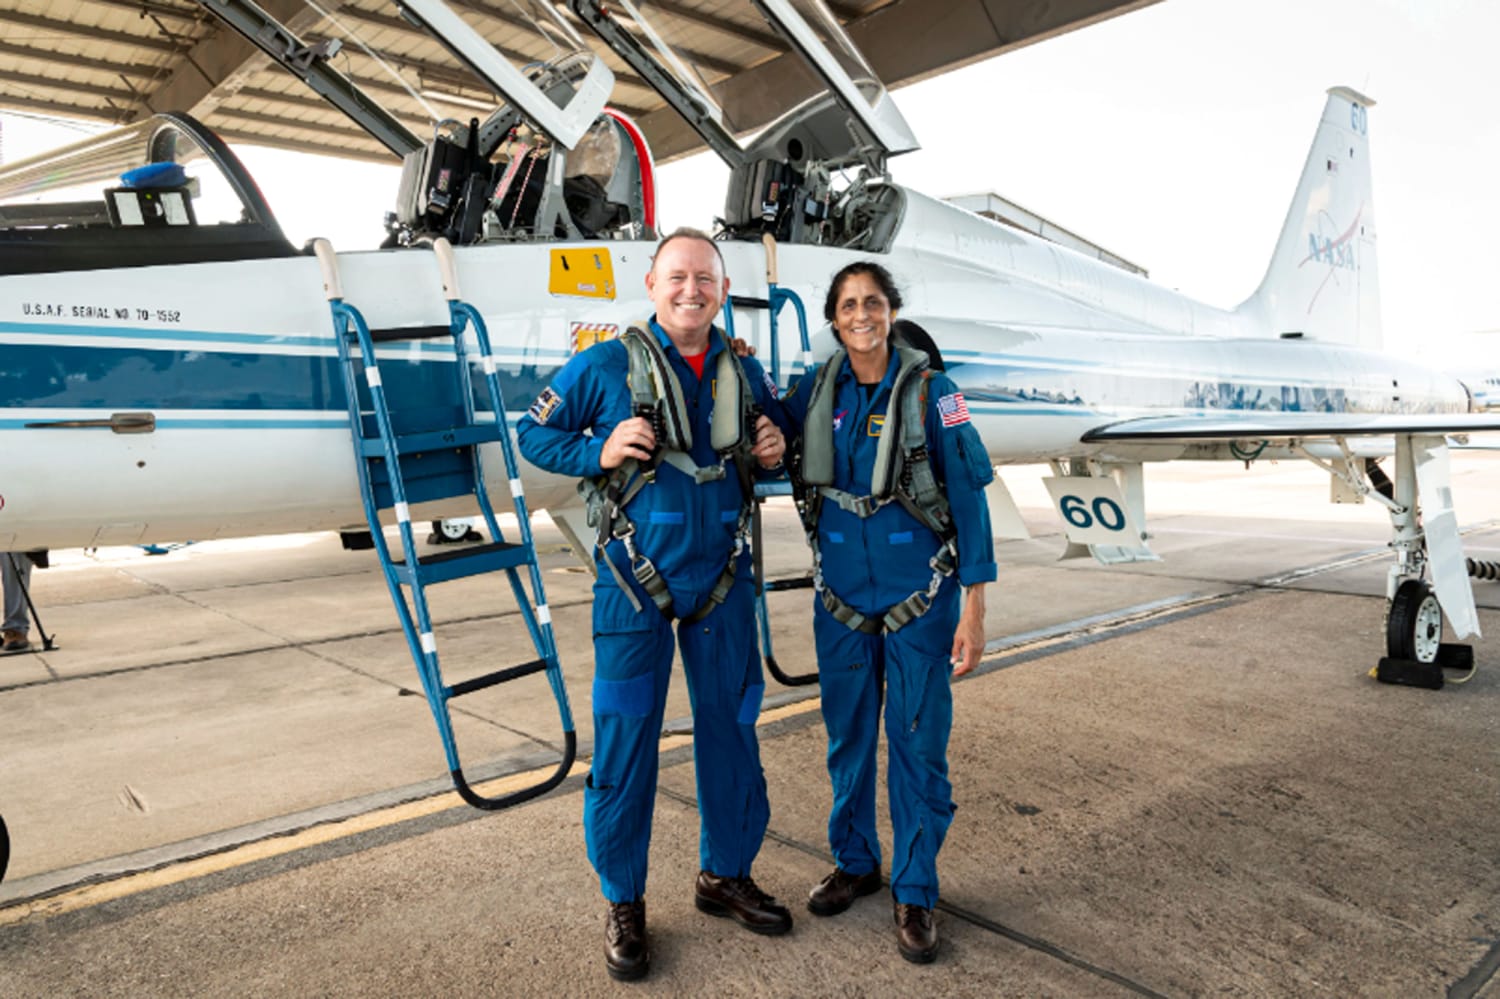 Meet the NASA astronauts who will be the first to launch on a Boeing spacecraft